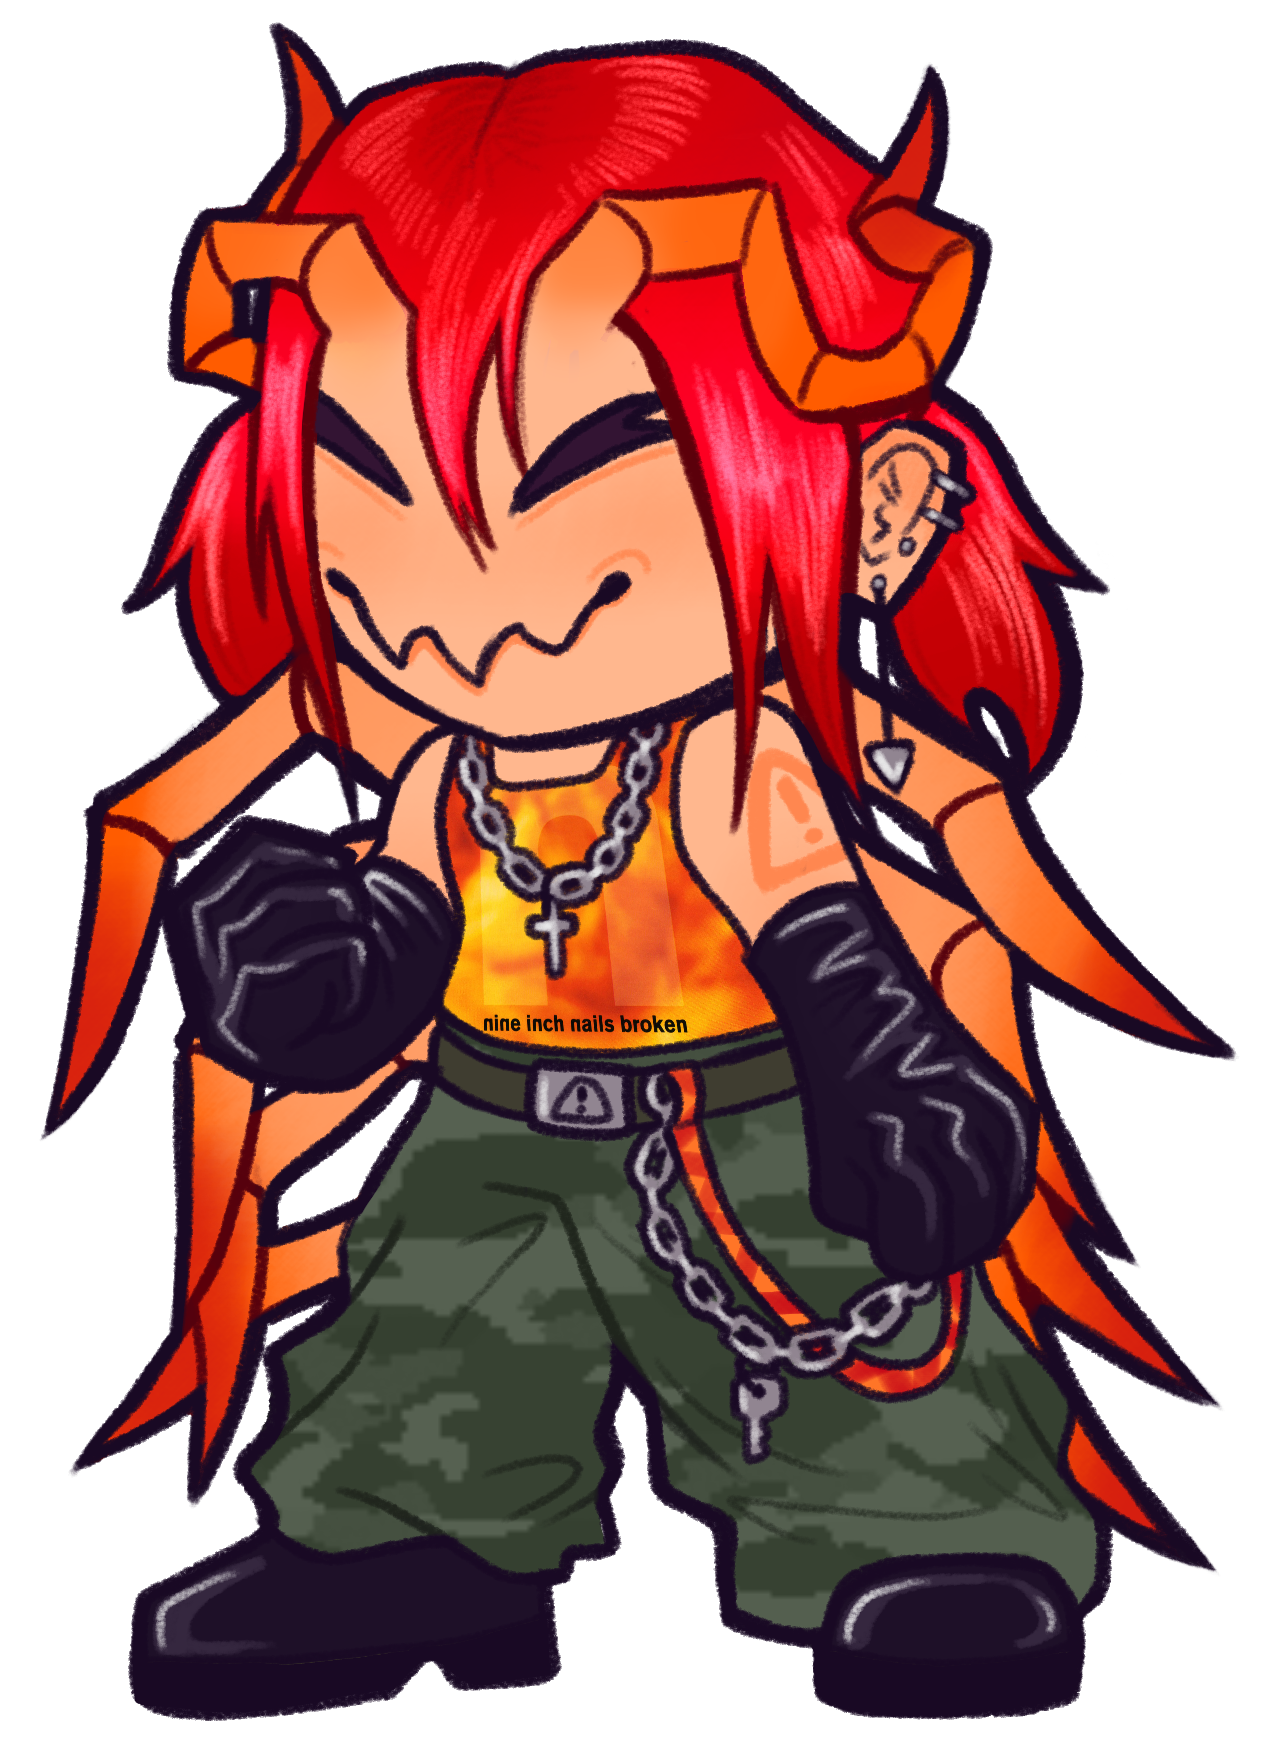 a chibi style drawing of virus, a light skinned humanoid with 4 centipede-like legs sticking out from her back, and two curled up antenae on their forehead. she has a tattoo of a warning symbol on her shoulder. their red hair is tied up in pigtails, and they are wearing loose camo pattern pants with chains, black boots, bicep-length latex gloves, a nine inch nails tank top, and multiple piercings in her ear. her eyes are closed, and their mandibles are curved up in a friendly smile.